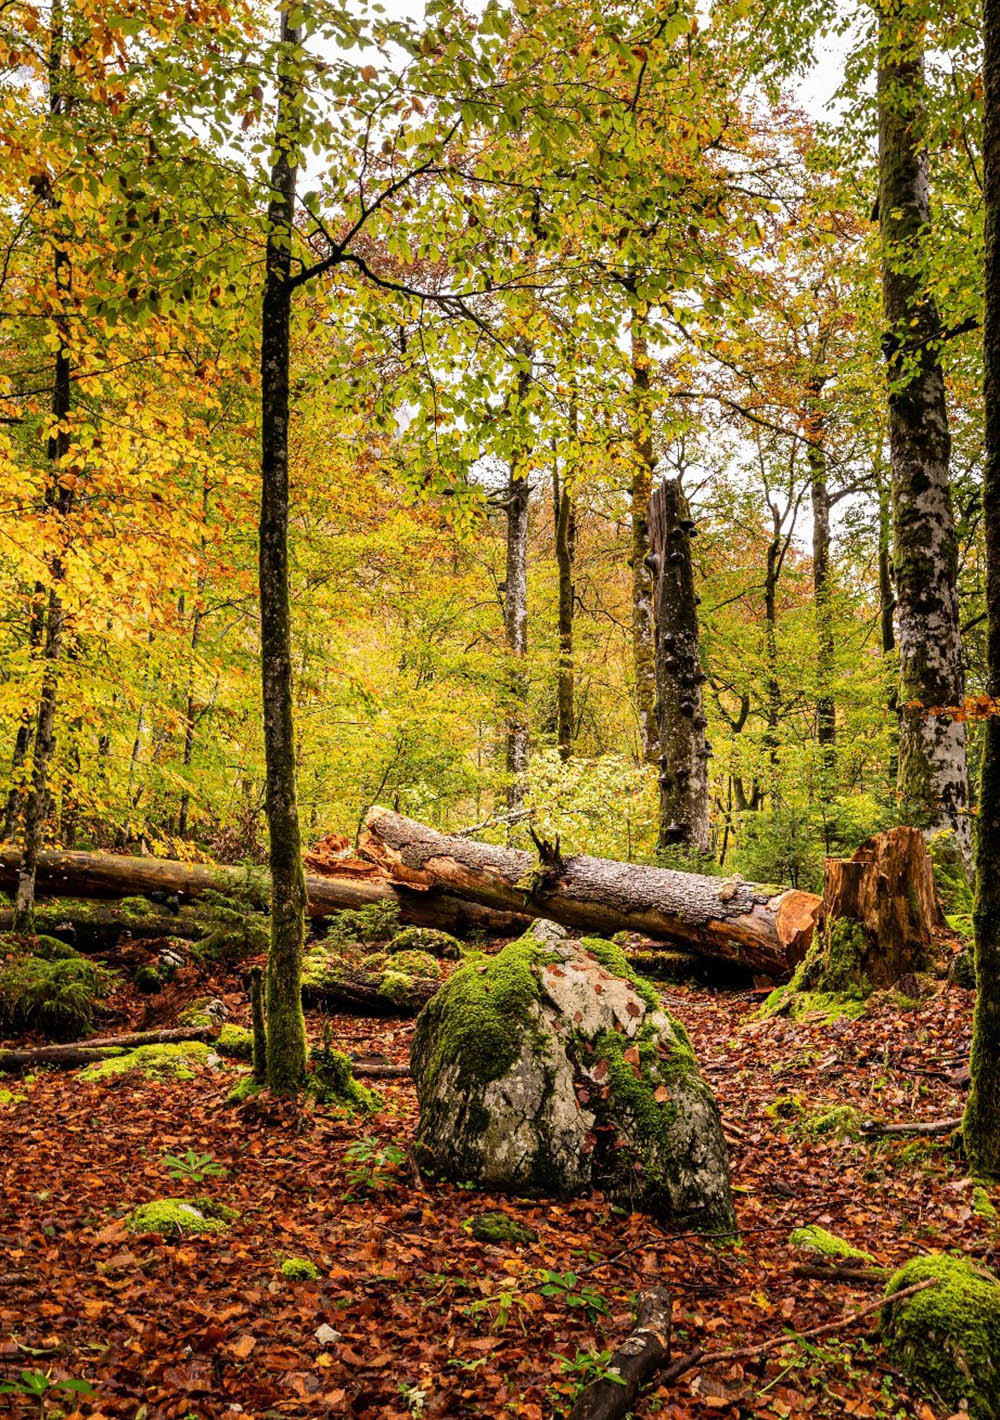 Natural forest structures in a submontane beech forest (Photo: Michael Maroschek)